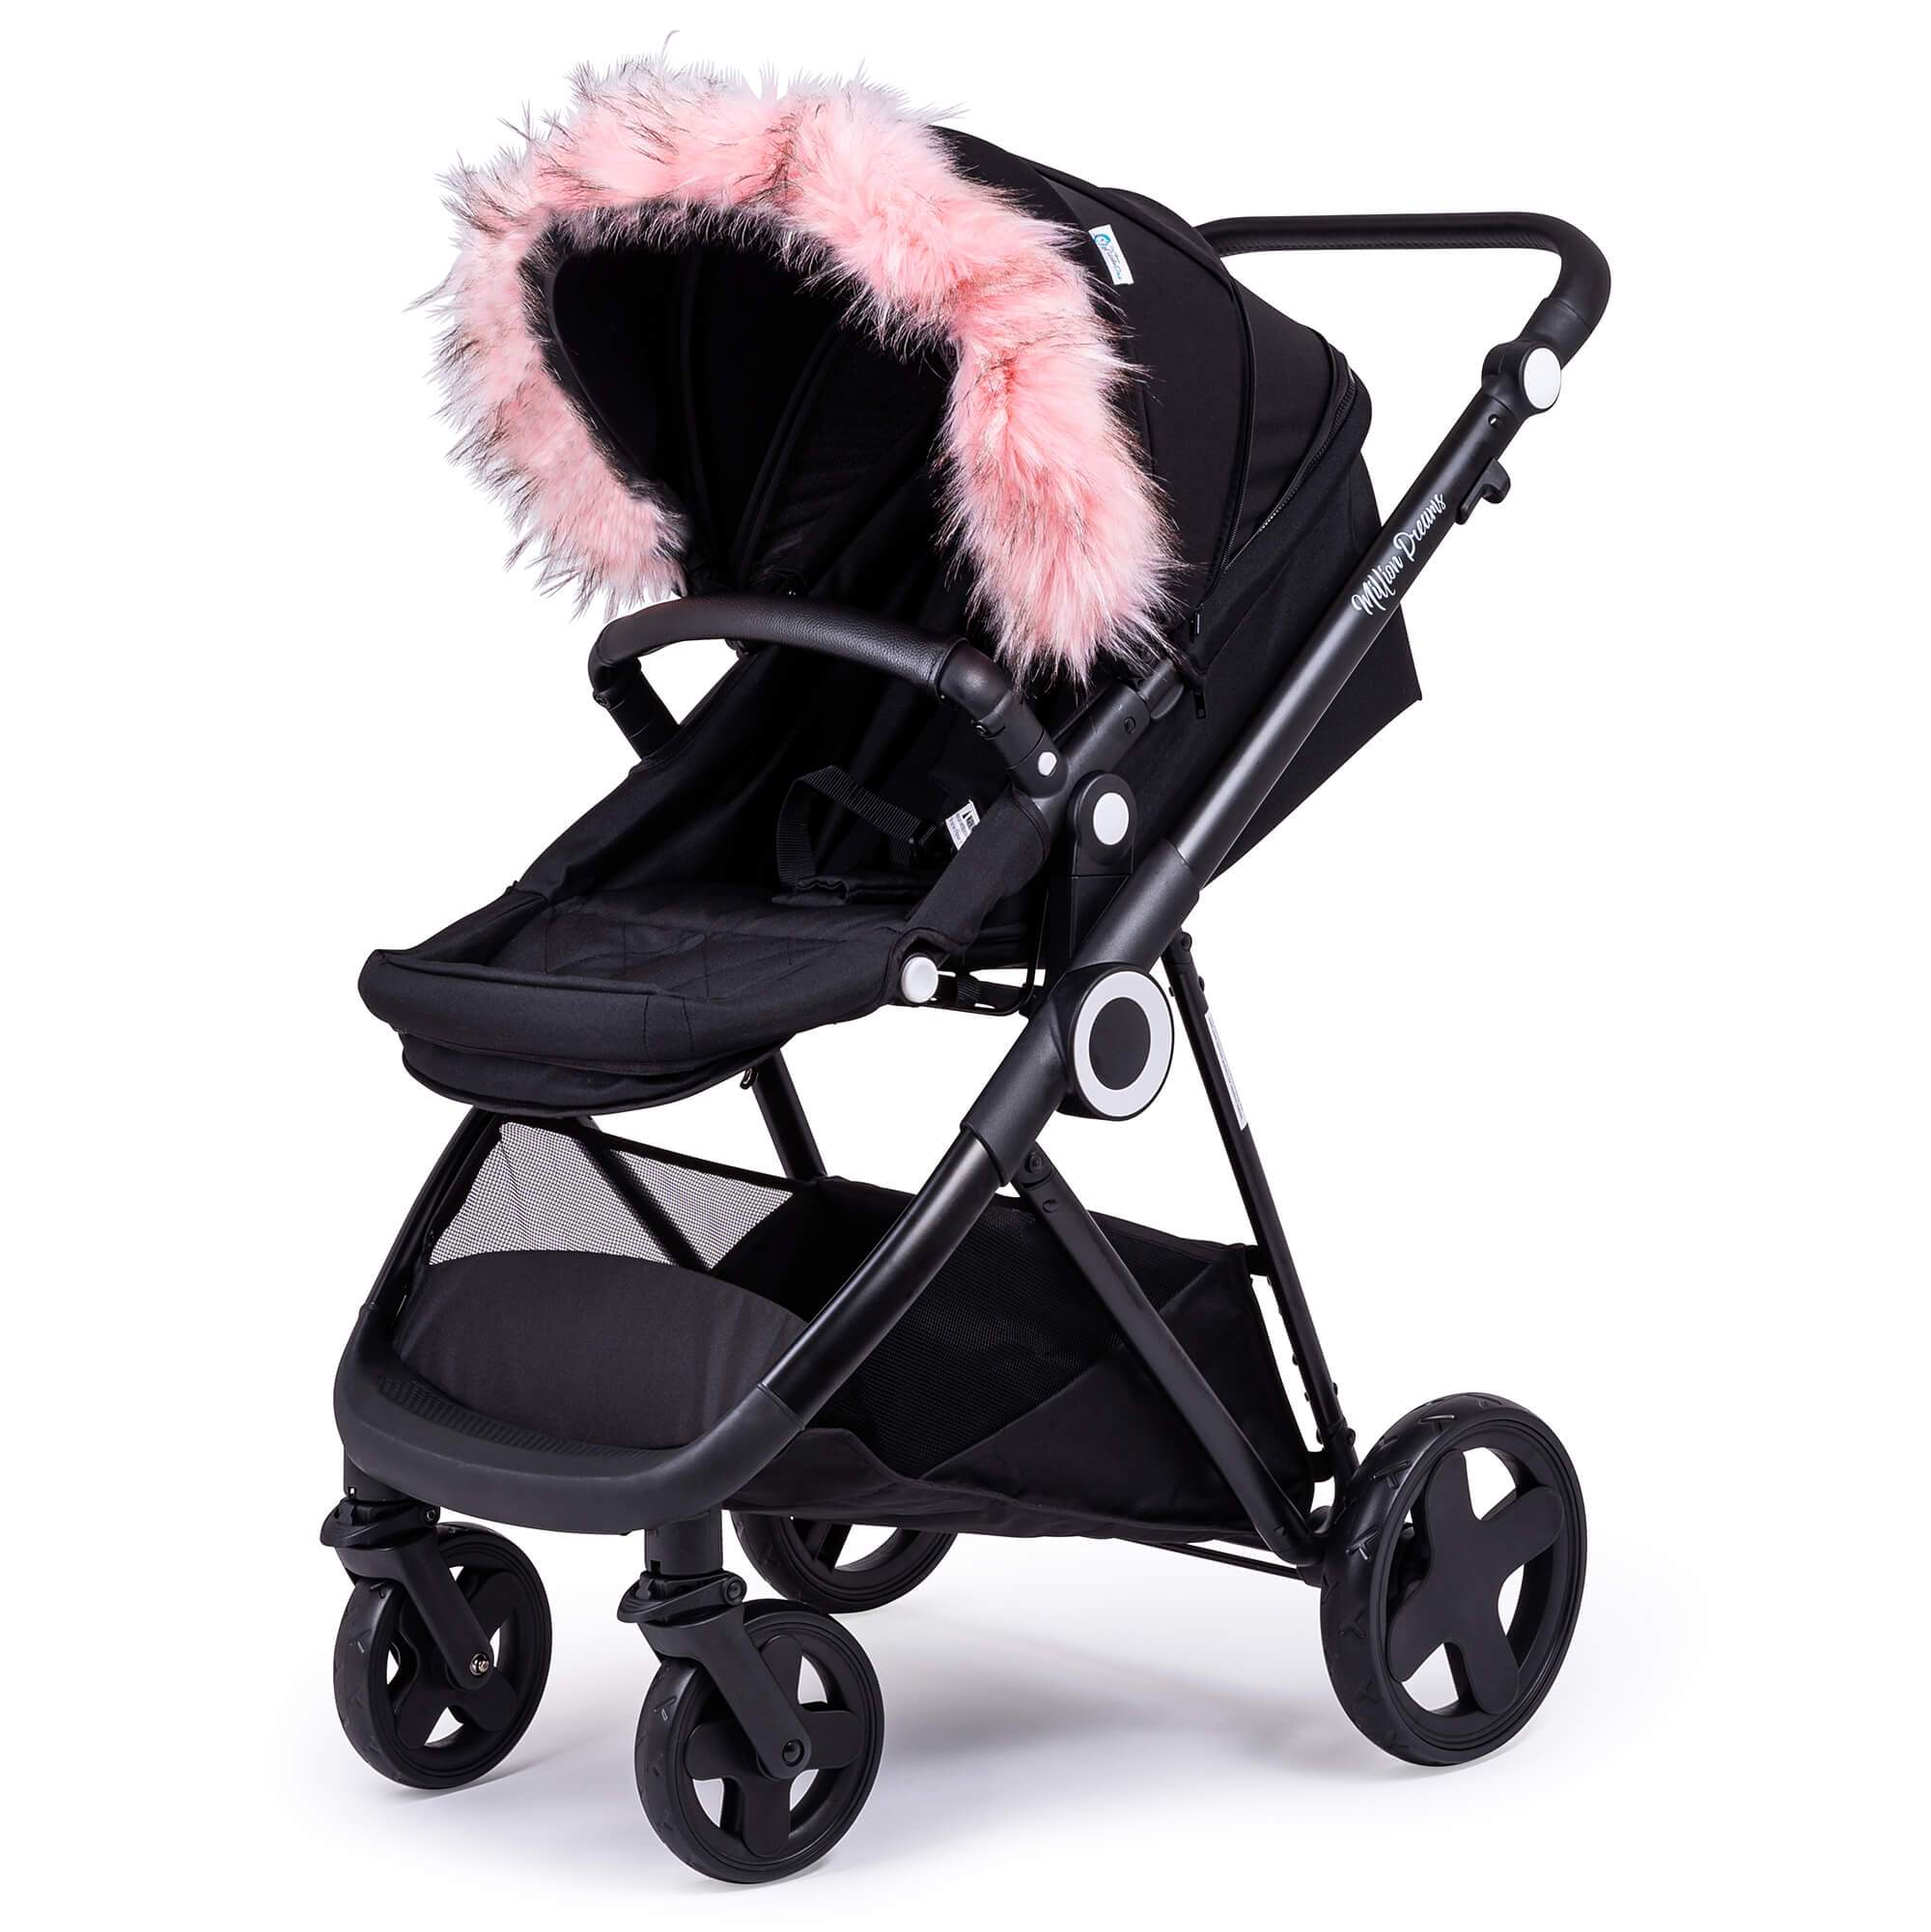 Pram Fur Hood Trim Attachment for Pushchair Compatible with Mamas & Papas - Light Pink / Fits All Models | For Your Little One